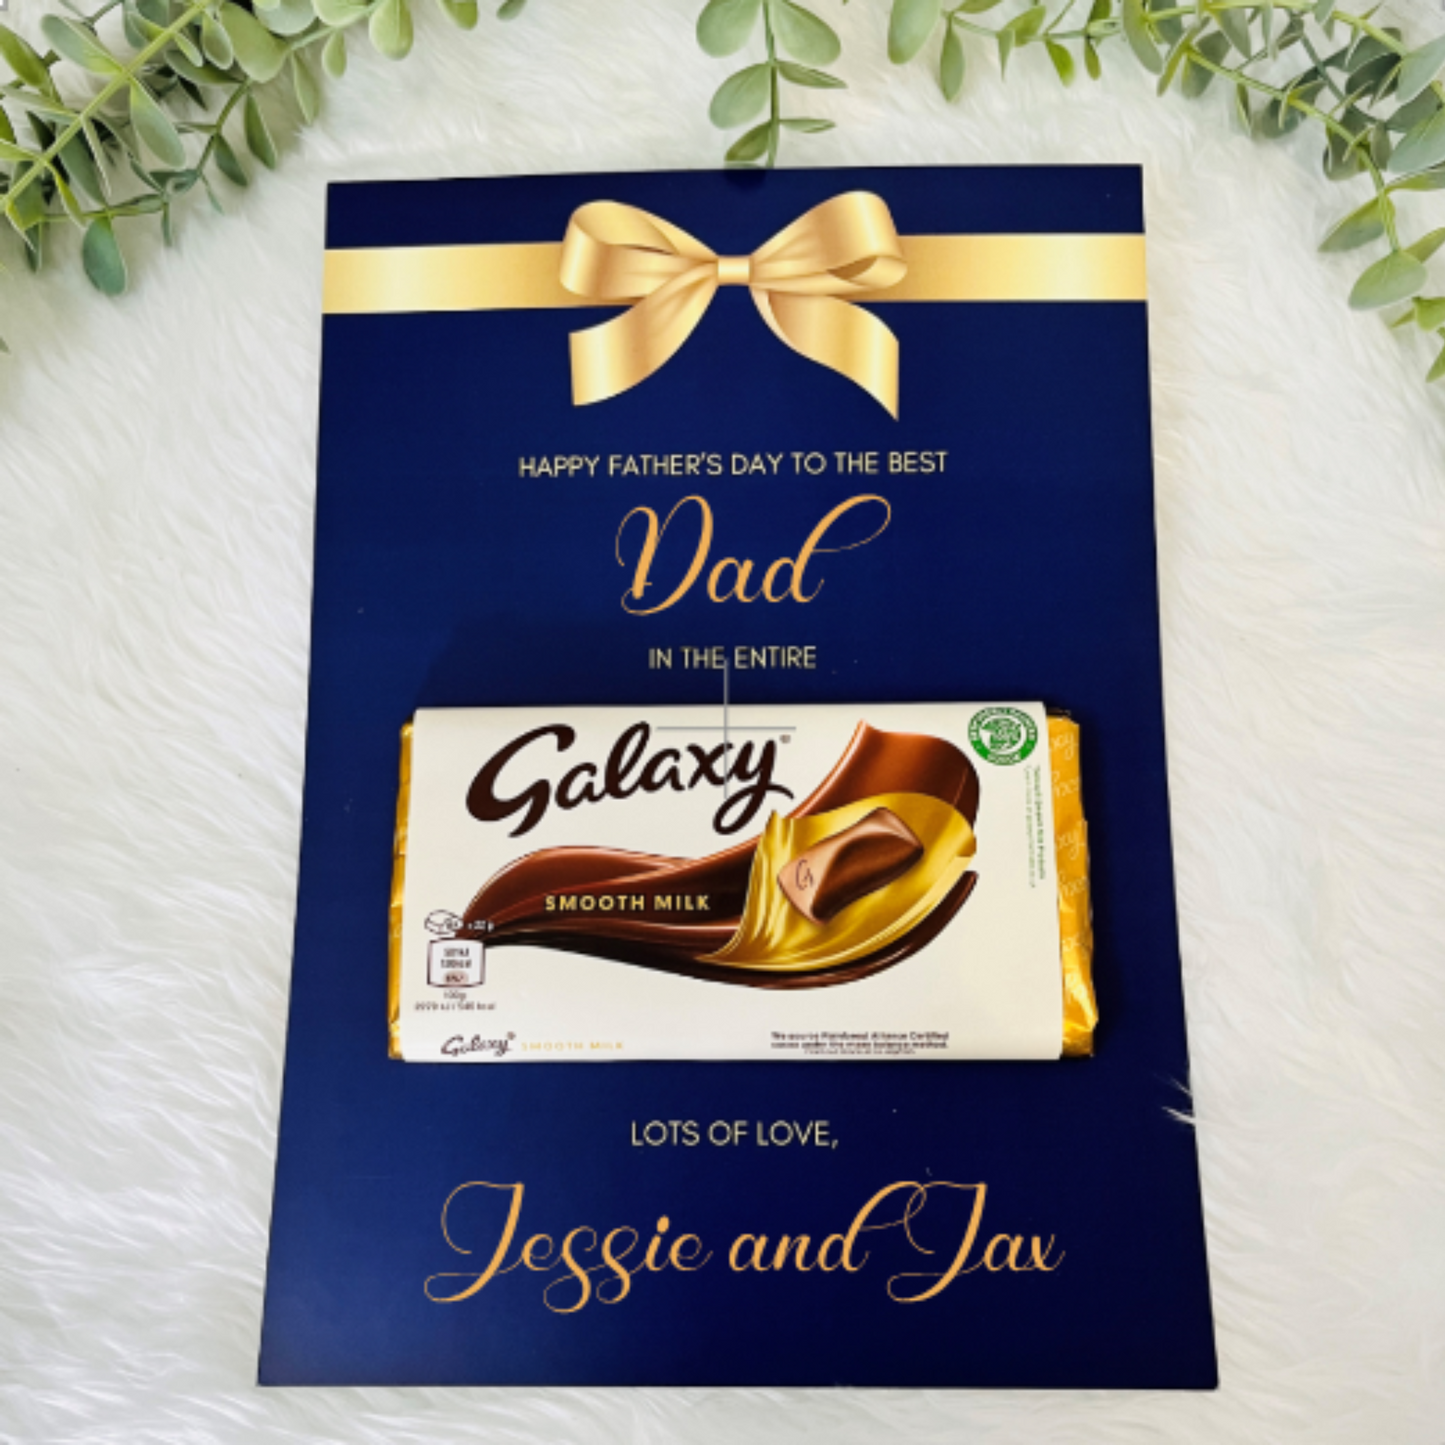 Personalised Chocolate A4 Galaxy Board for Fathers Day, The best in the Galaxy Gift, Fathers Day gift for Dad